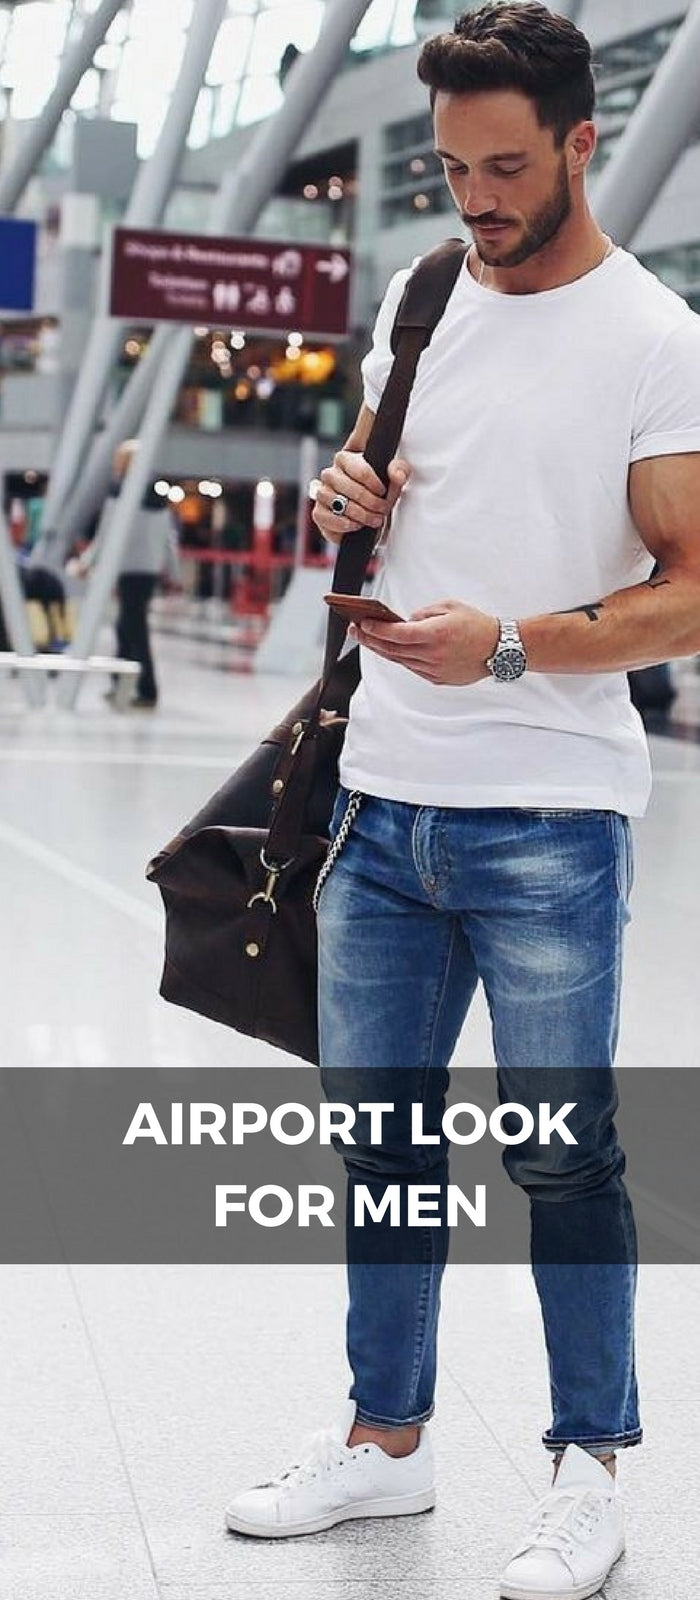 Airport Looks, Airport Outfit Ideas For Men